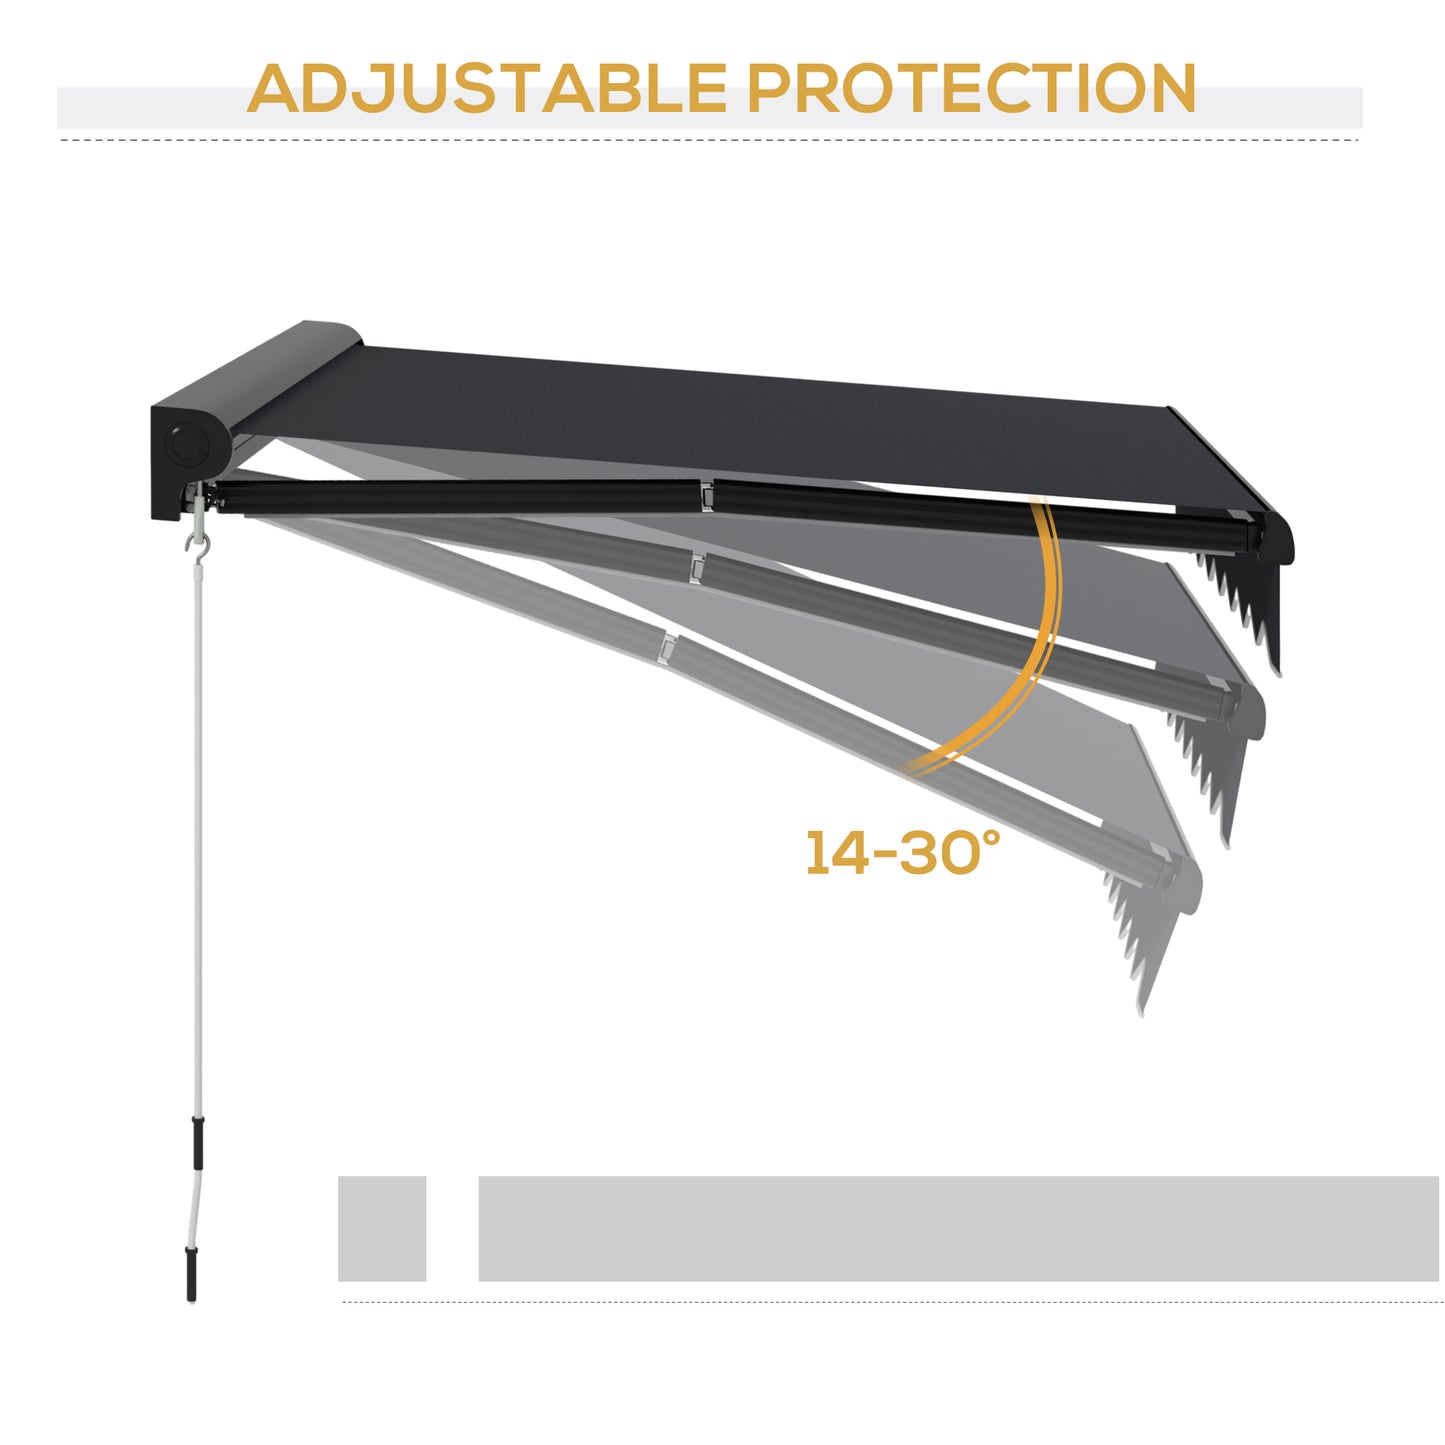 Outsunny 2.5 x 2m Electric Awning with LED Light, Aluminium Frame Retractable Awning Sun Canopies for Patio Door Window